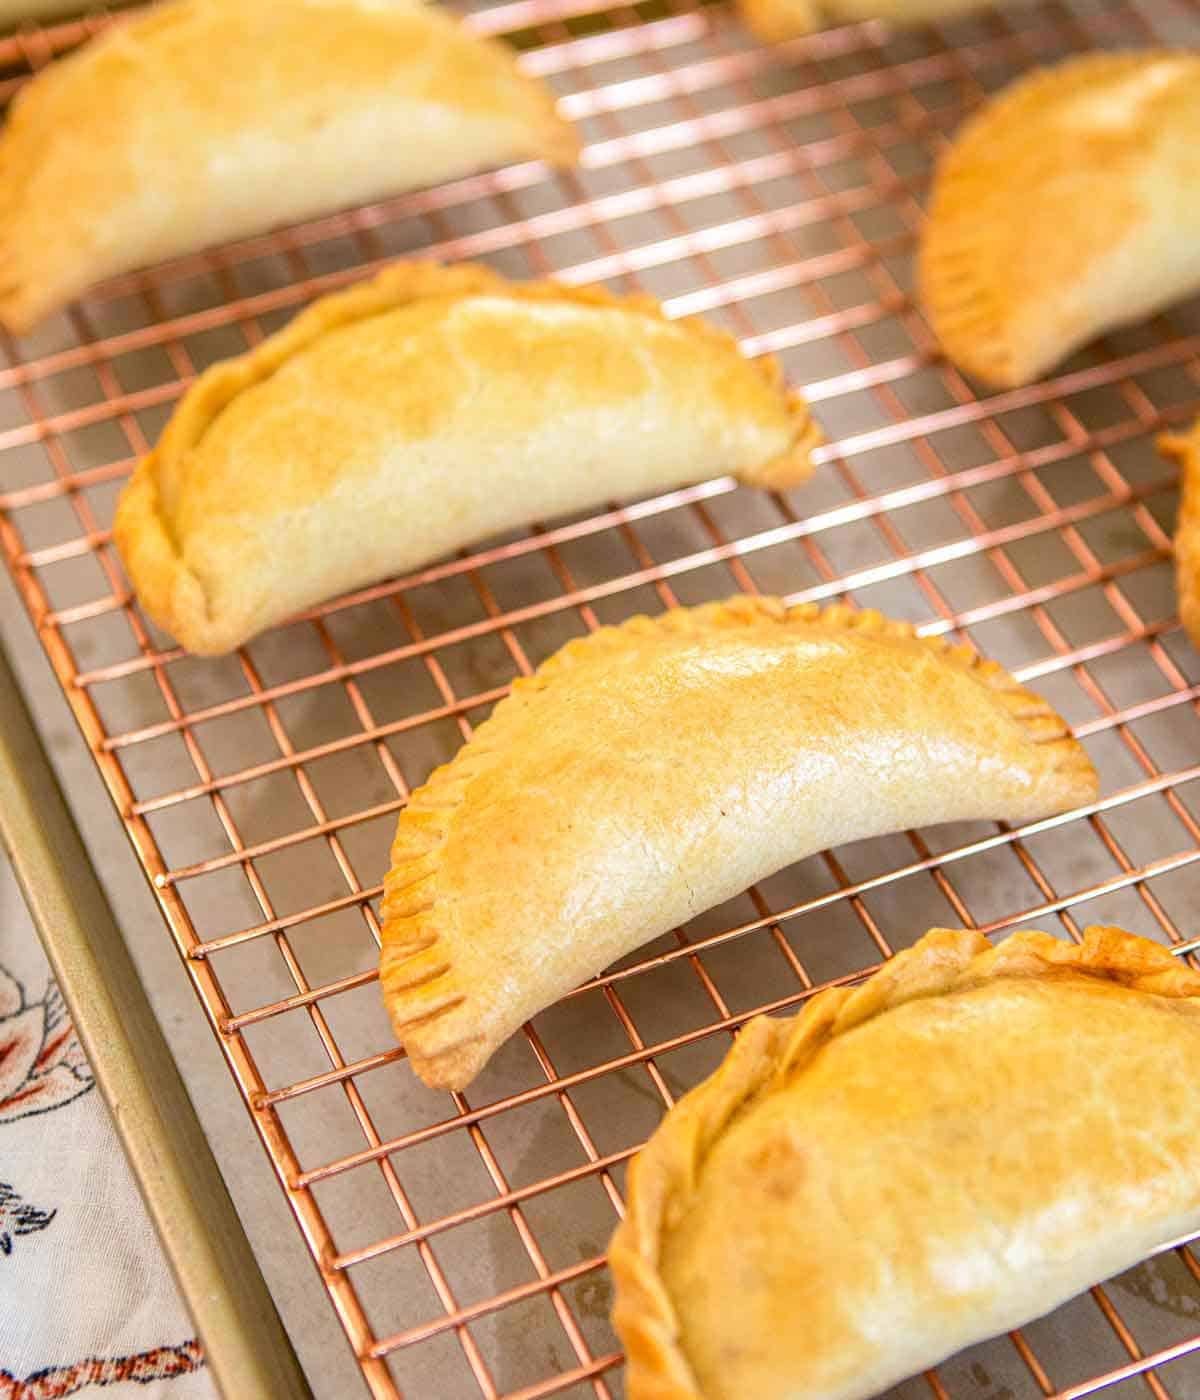 Multiple empanadas on a wire cooling rack.